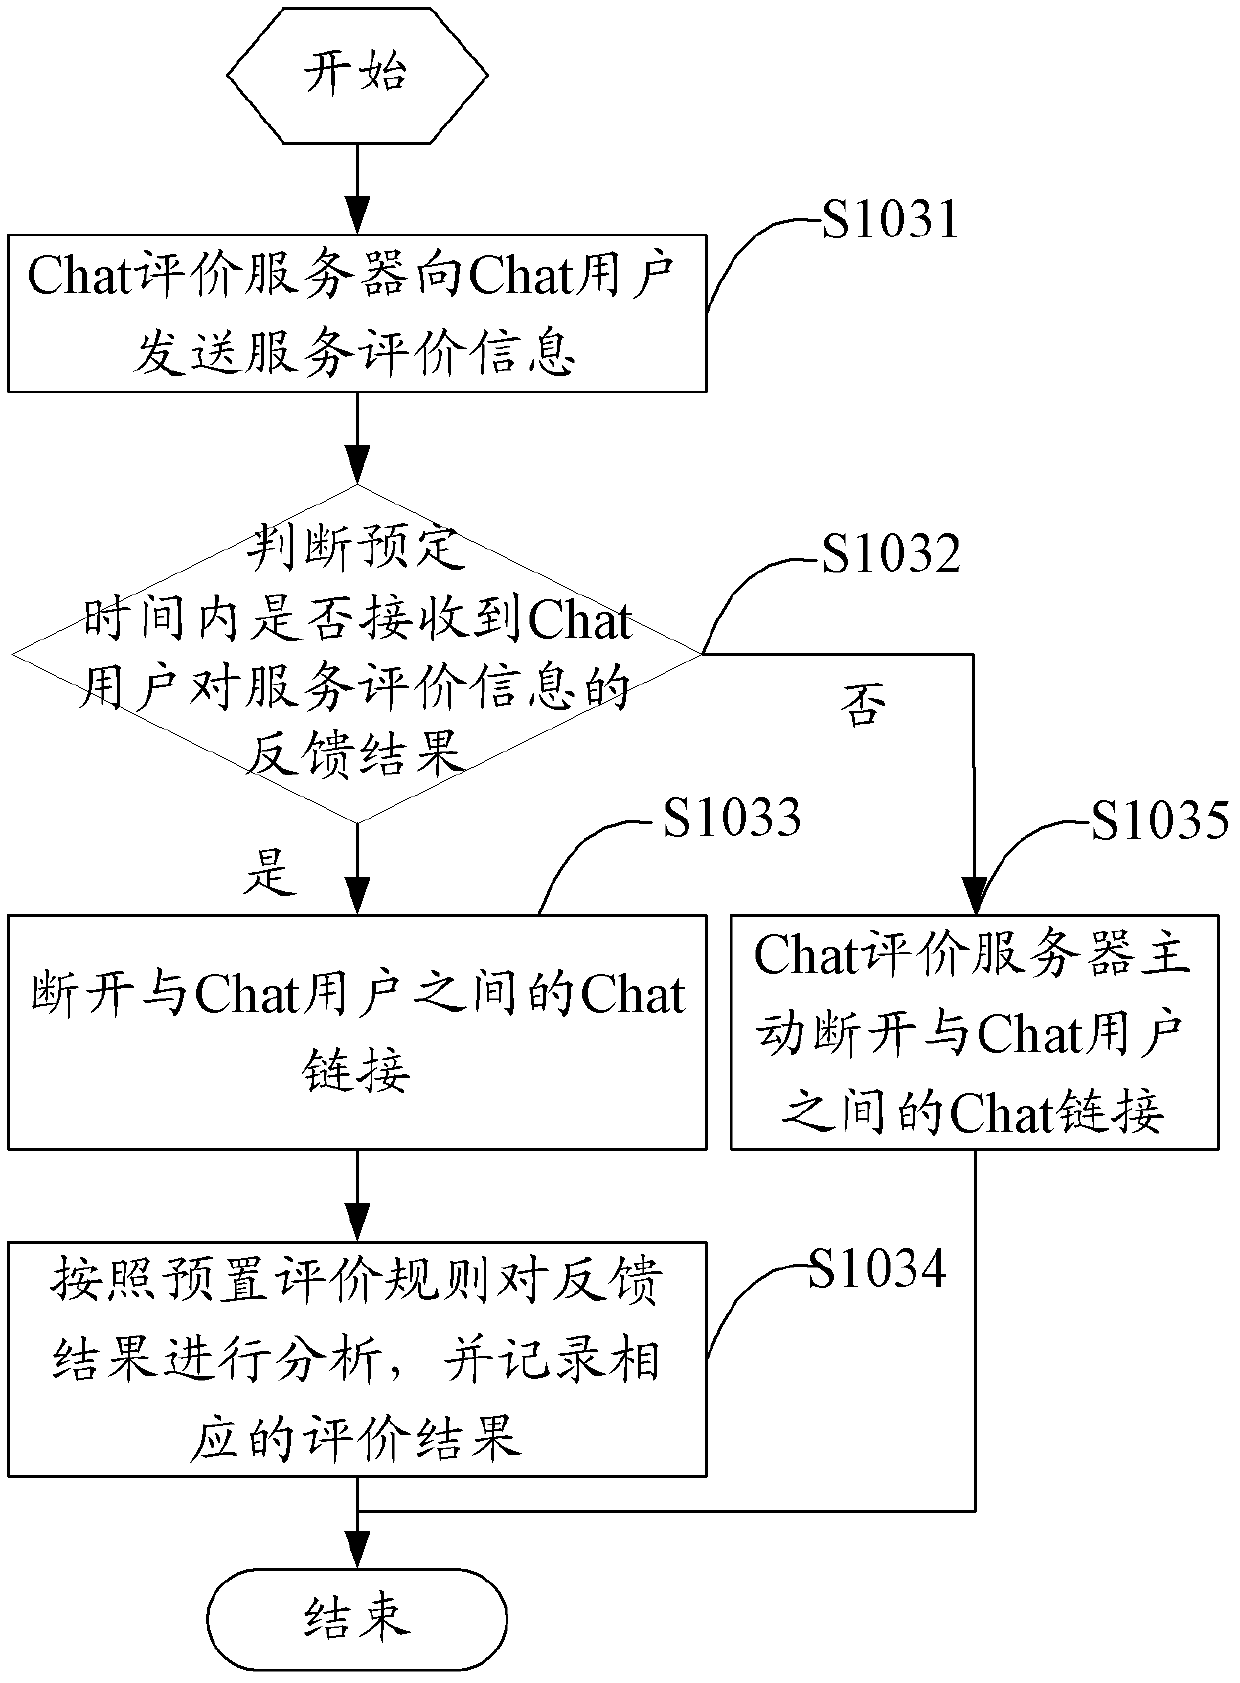 Method and system for evaluating call center Chat